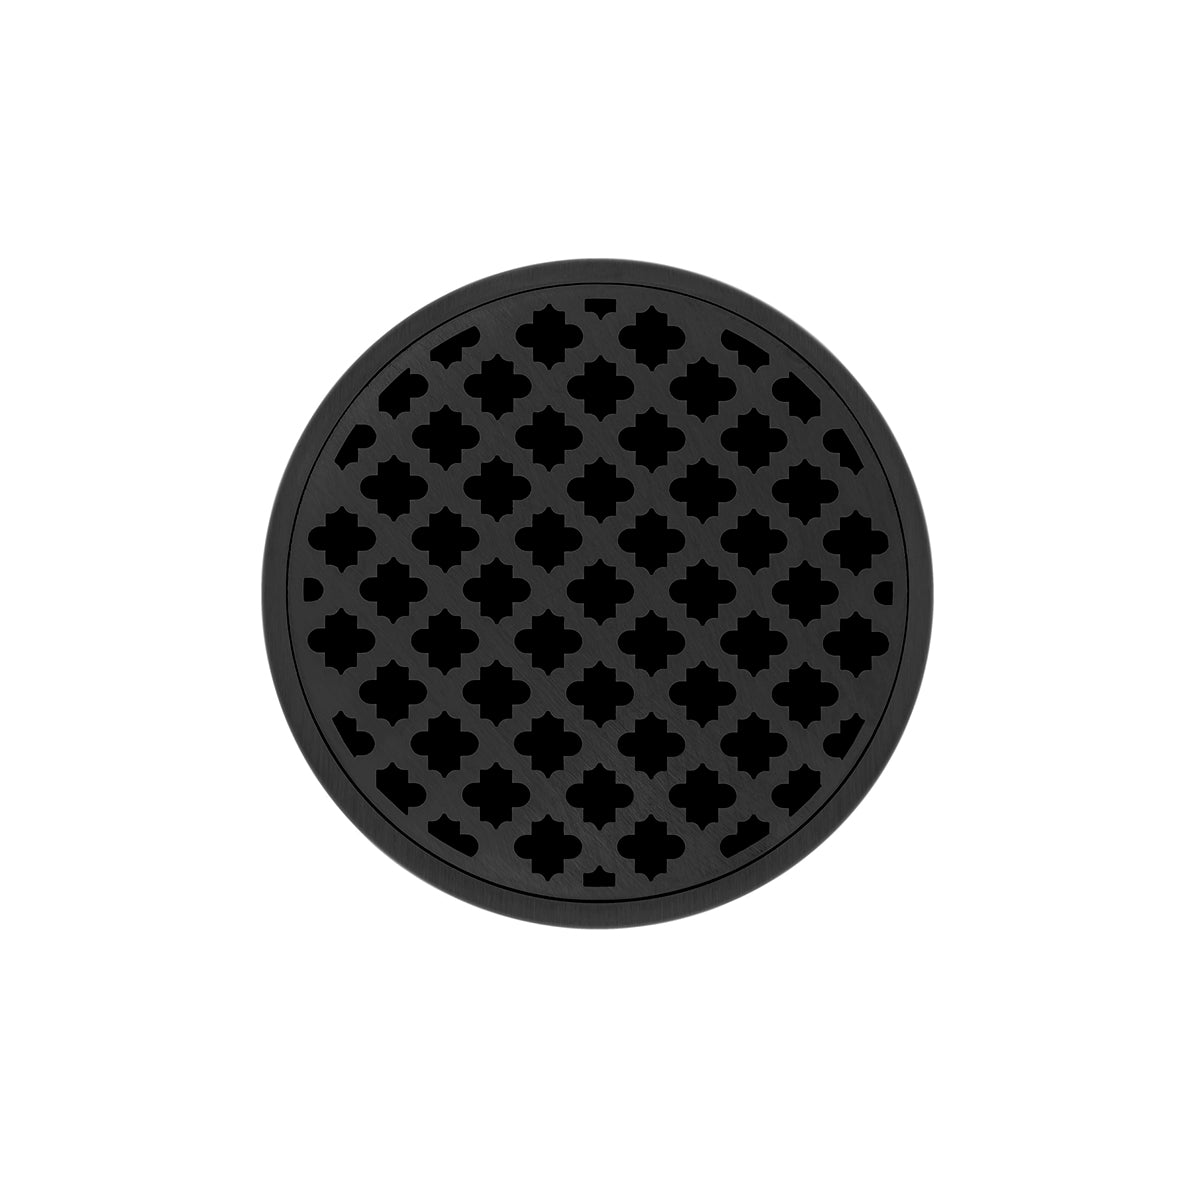 Infinity Drain 5" Round RMD 5 Premium Center Drain Kit with Moor Pattern Decorative Plate with ABS Drain Body, 2" Outlet